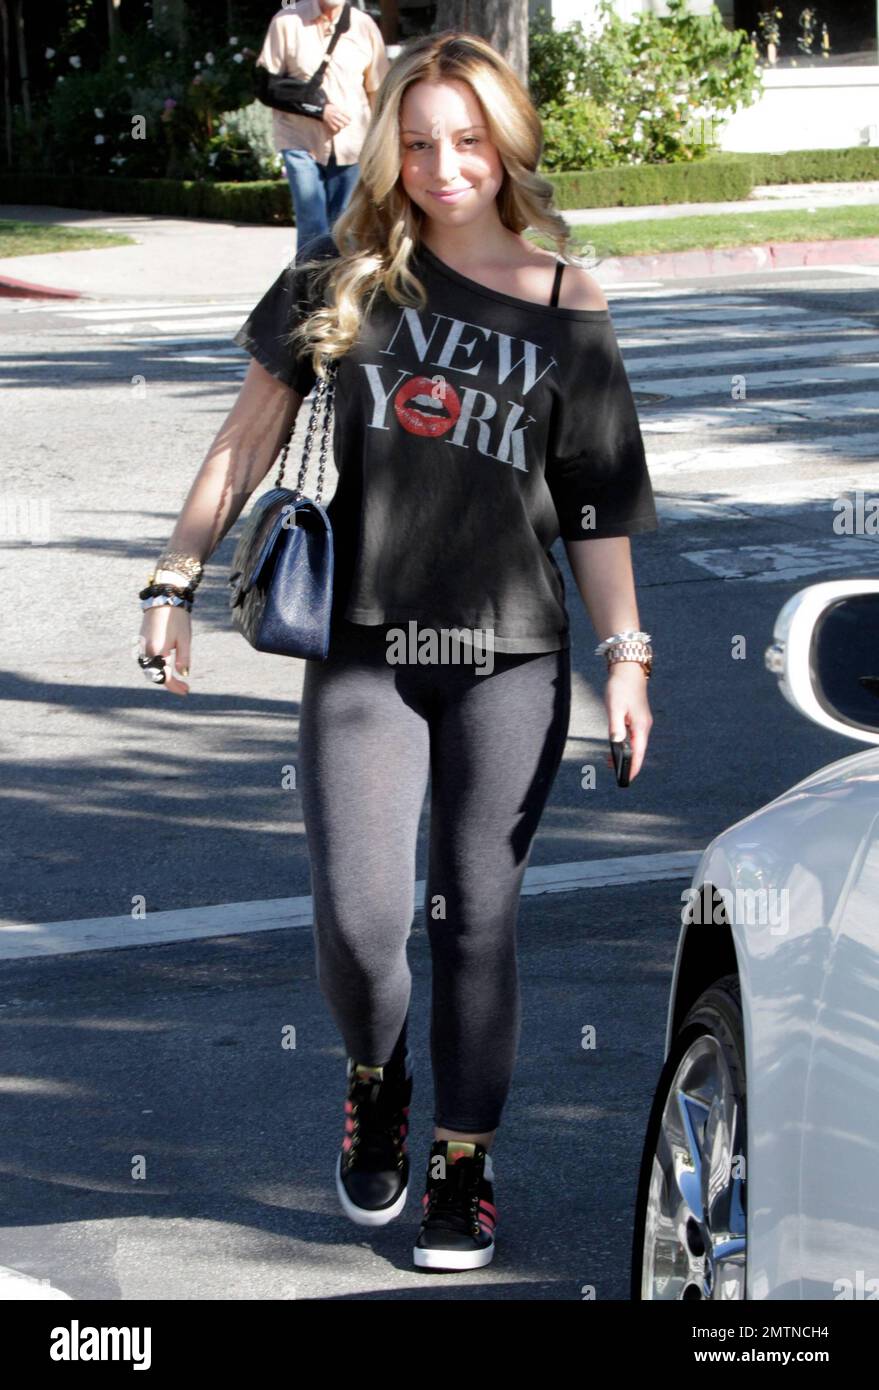 EXCLUSIVE!! - Skyler Shaye, goddaughter to actor Jon Voight, was seen leaving Ken Paves Salon in a black off the shoulder t shirt with New York printed on it, black leggings and paired off with black sneakers. Skyler is best known for her role as Cloe in 'Bratz: The Movie.' Los Angeles, CA. 27th October 2011. Stock Photo